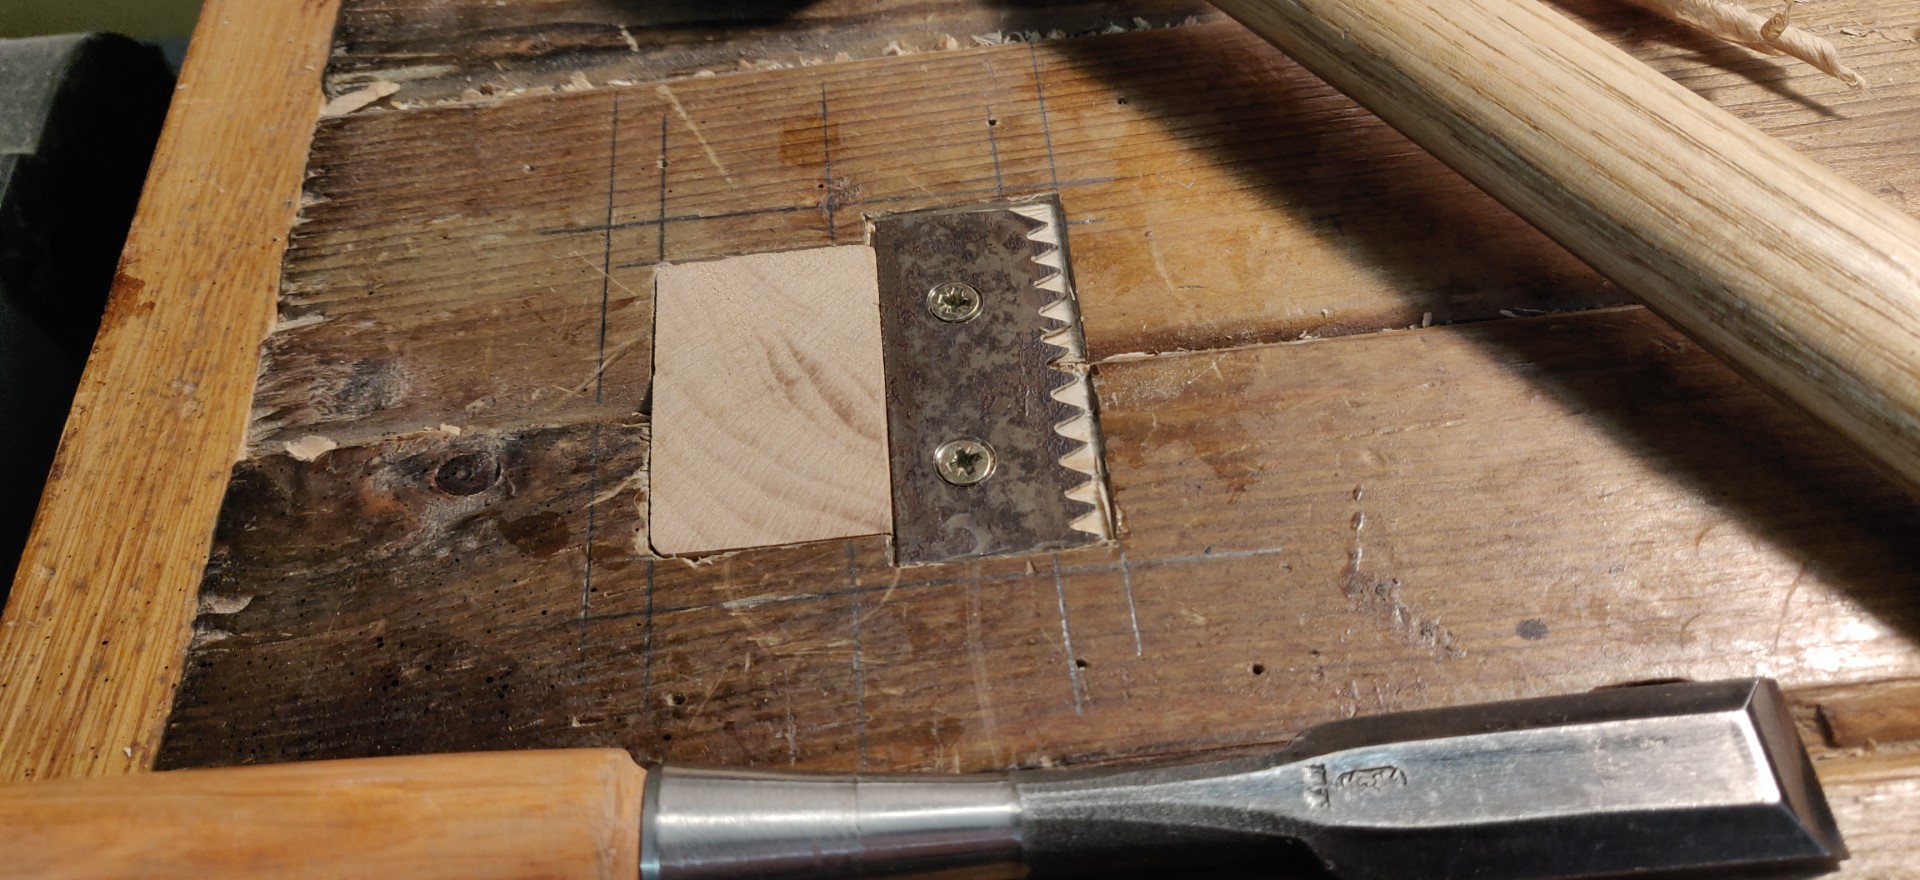 The stop retracted under the surface of the workbench.